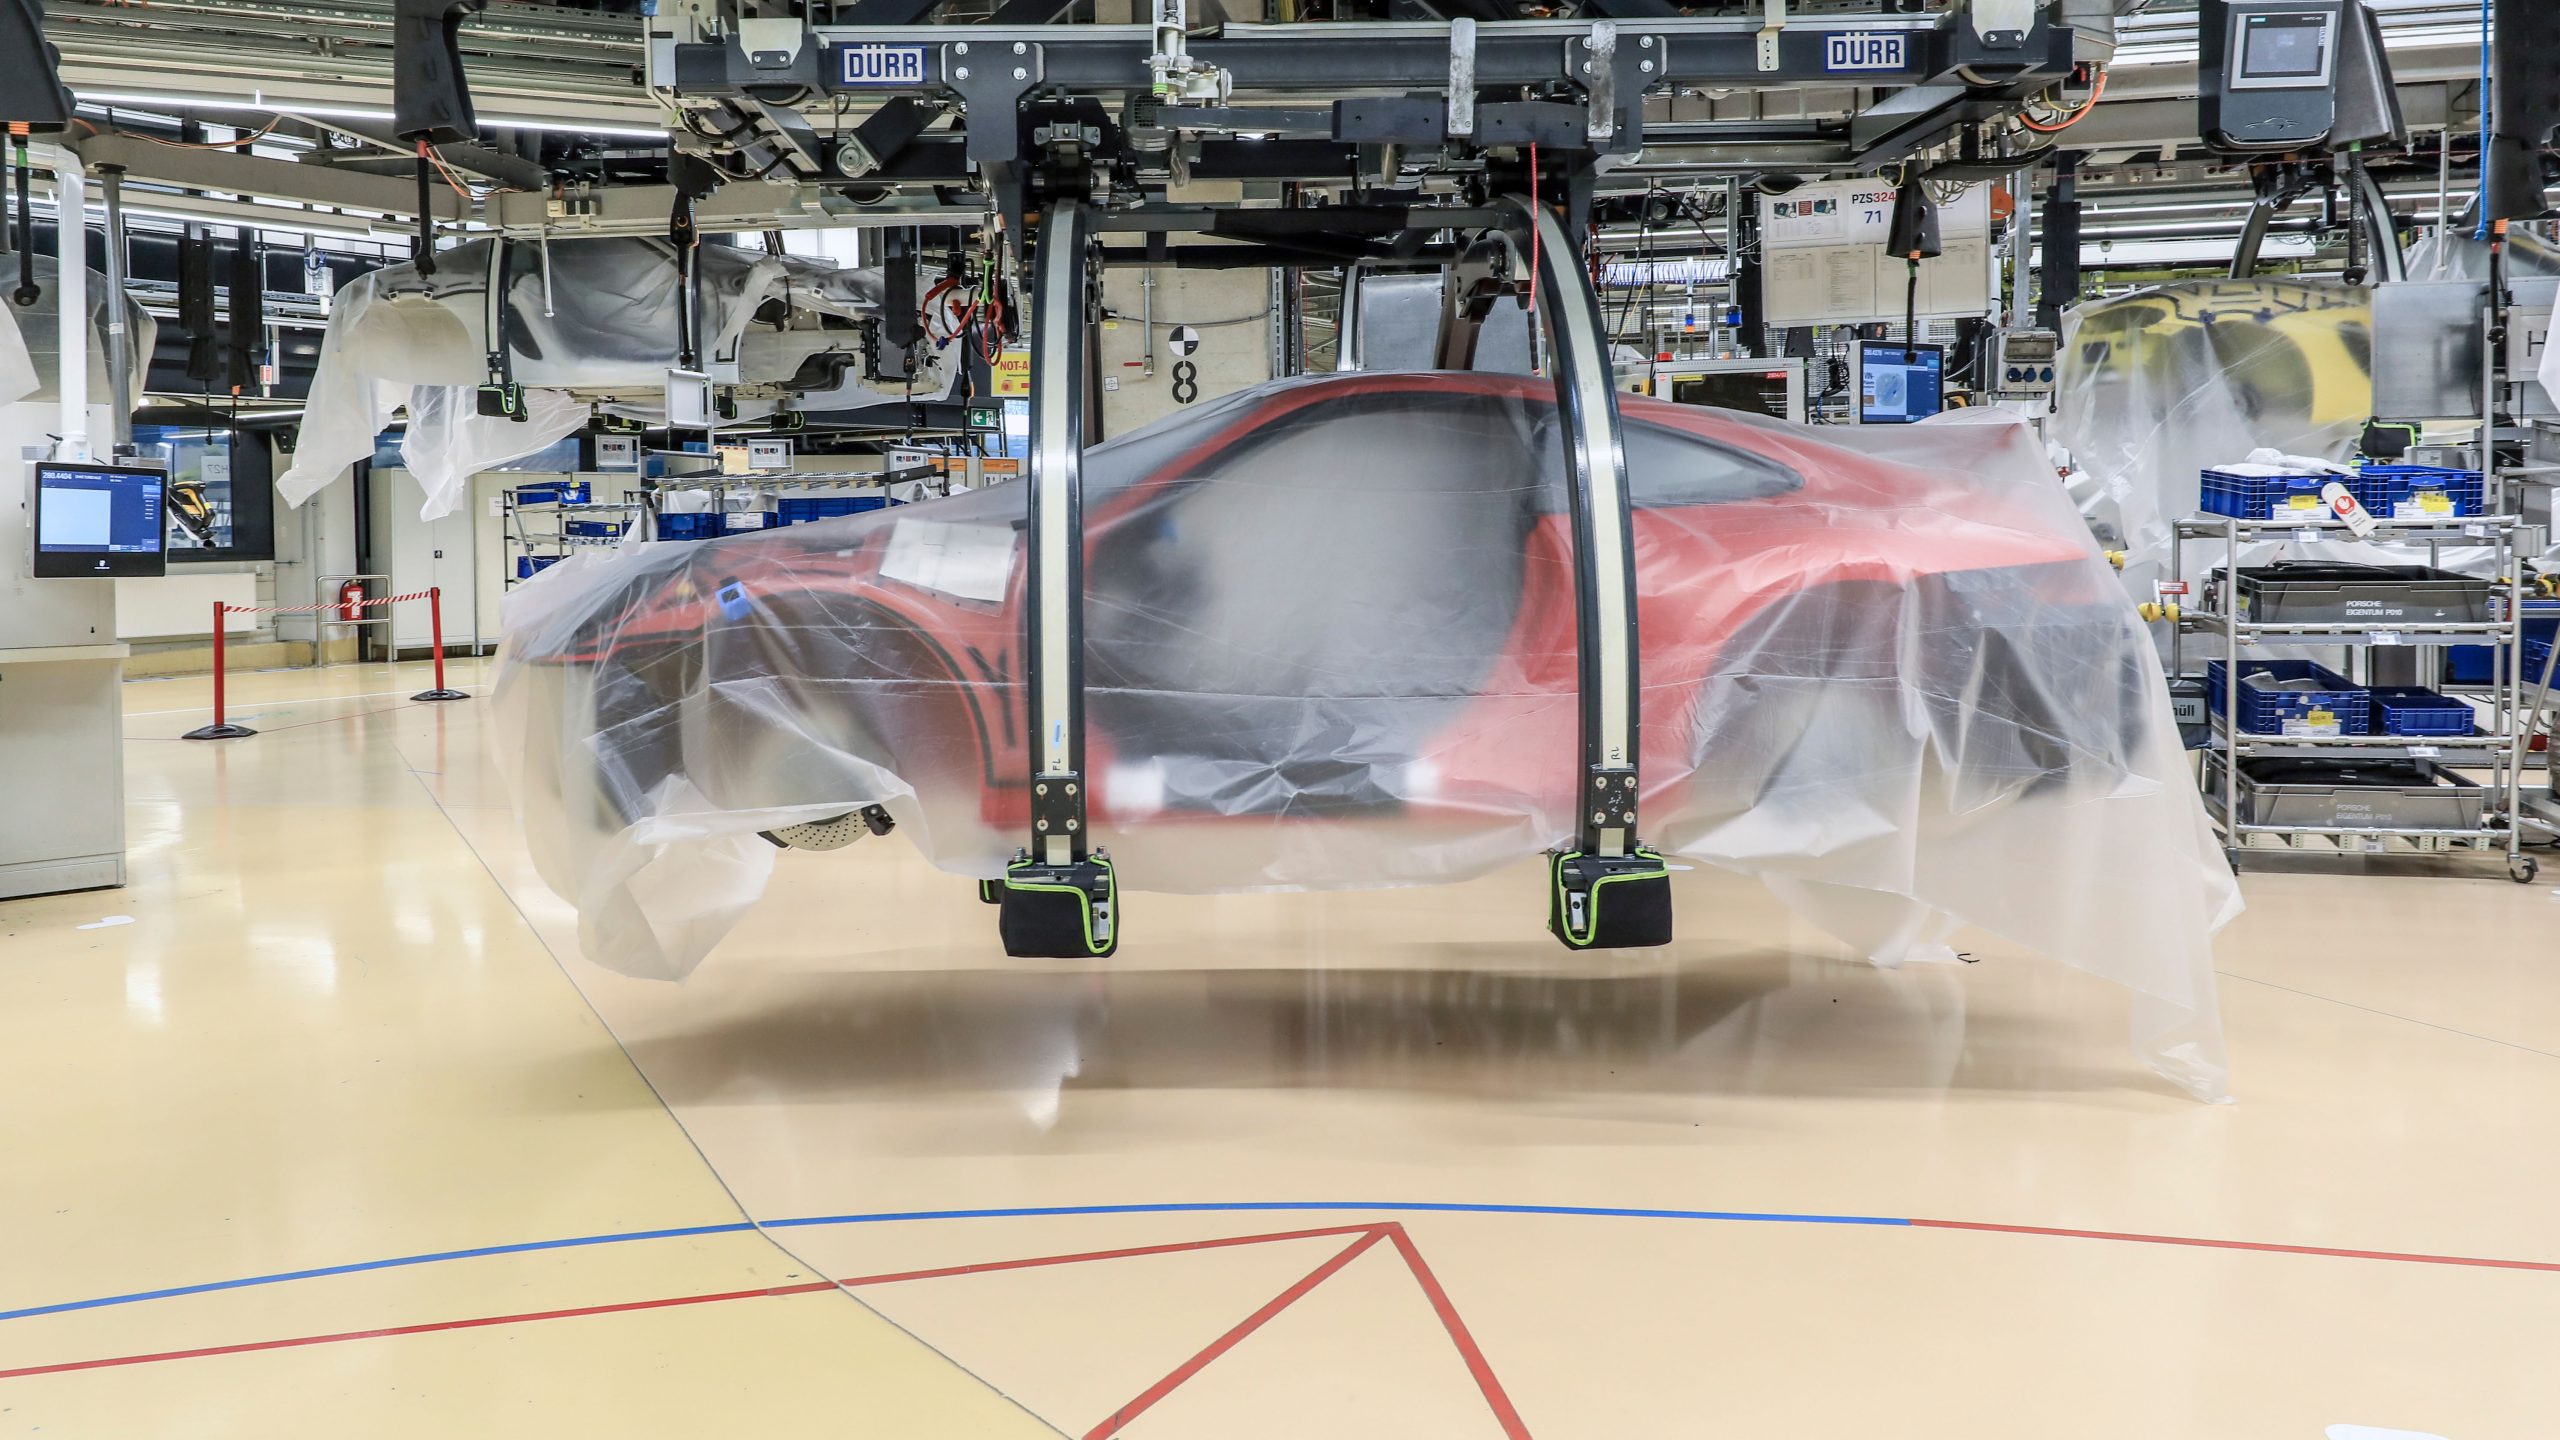 Porsche Factory Germany: Images Show It Like You’ve Never Seen Before